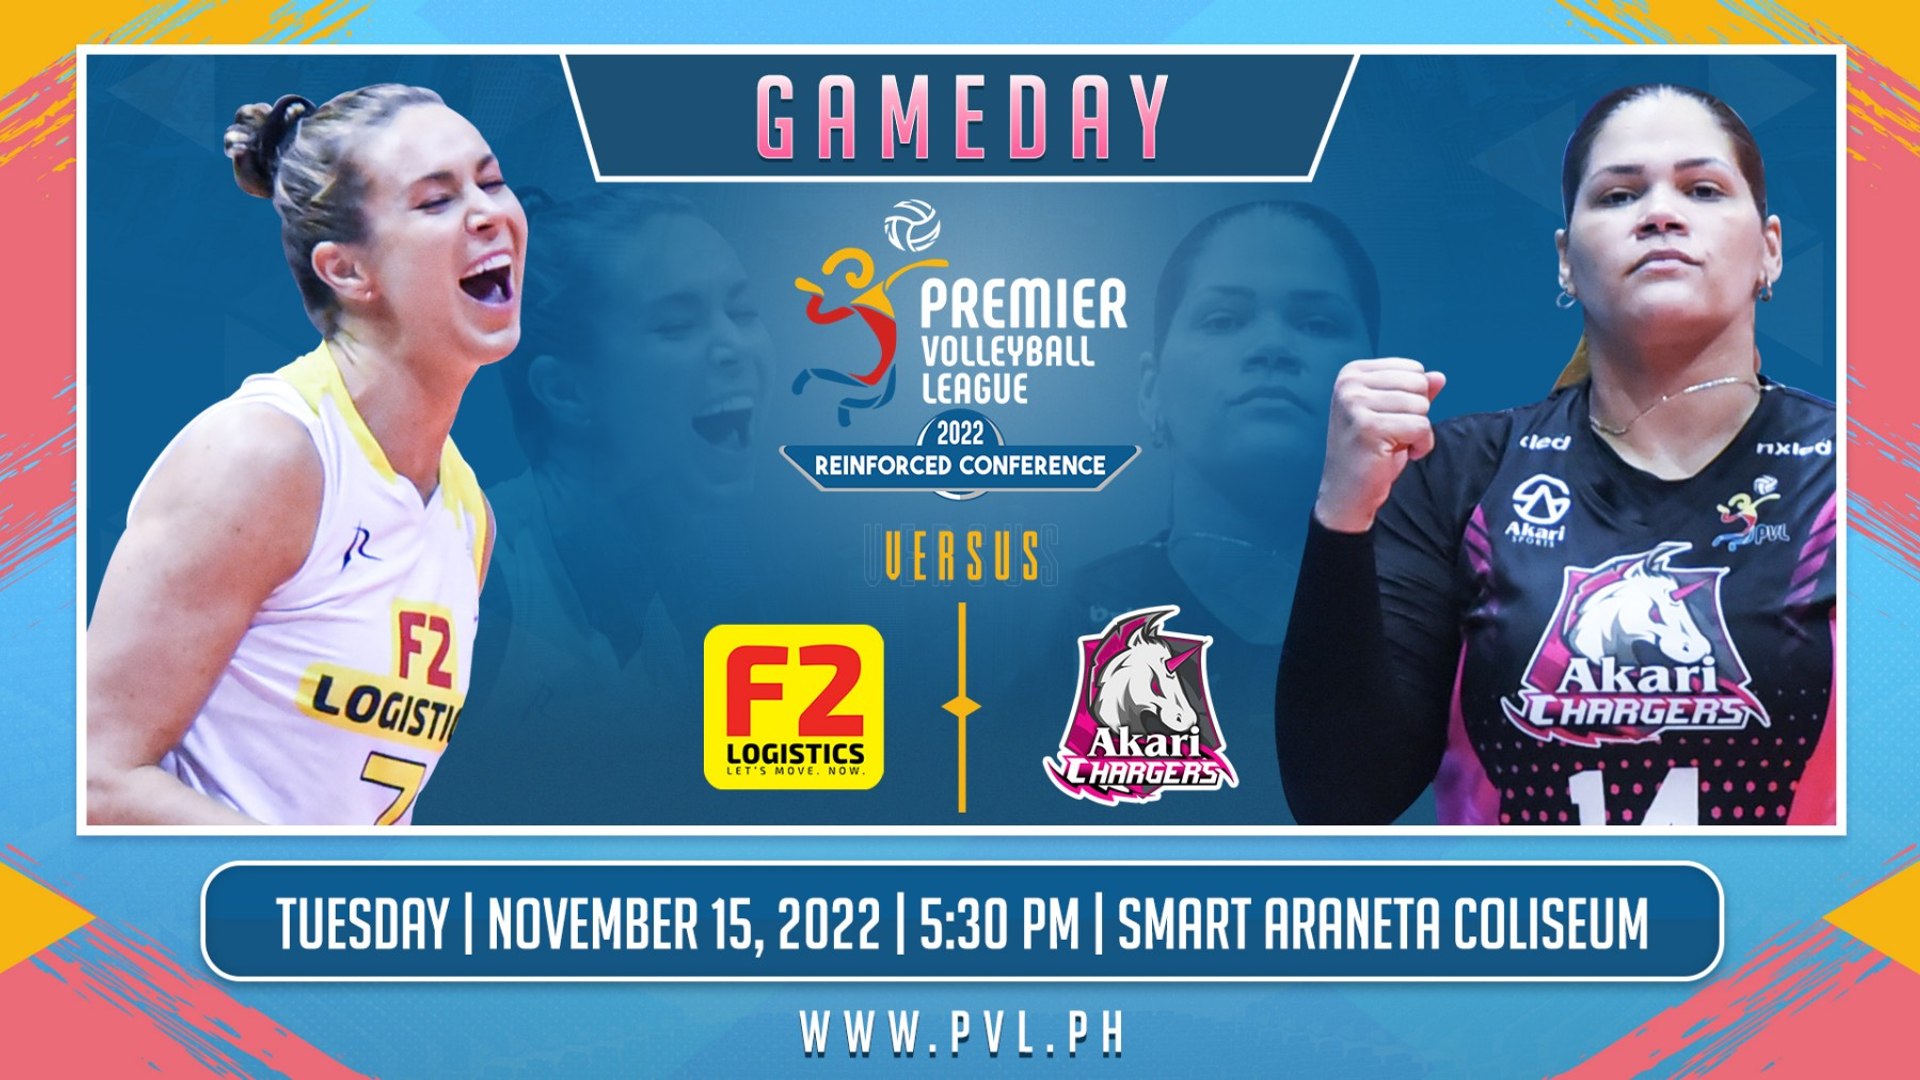 GAME 2 NOVEMBER 15, 2022 F2 LOGISTICS vs AKARI CHARGERS 2022 PVL REINFORCED CONFERENCE